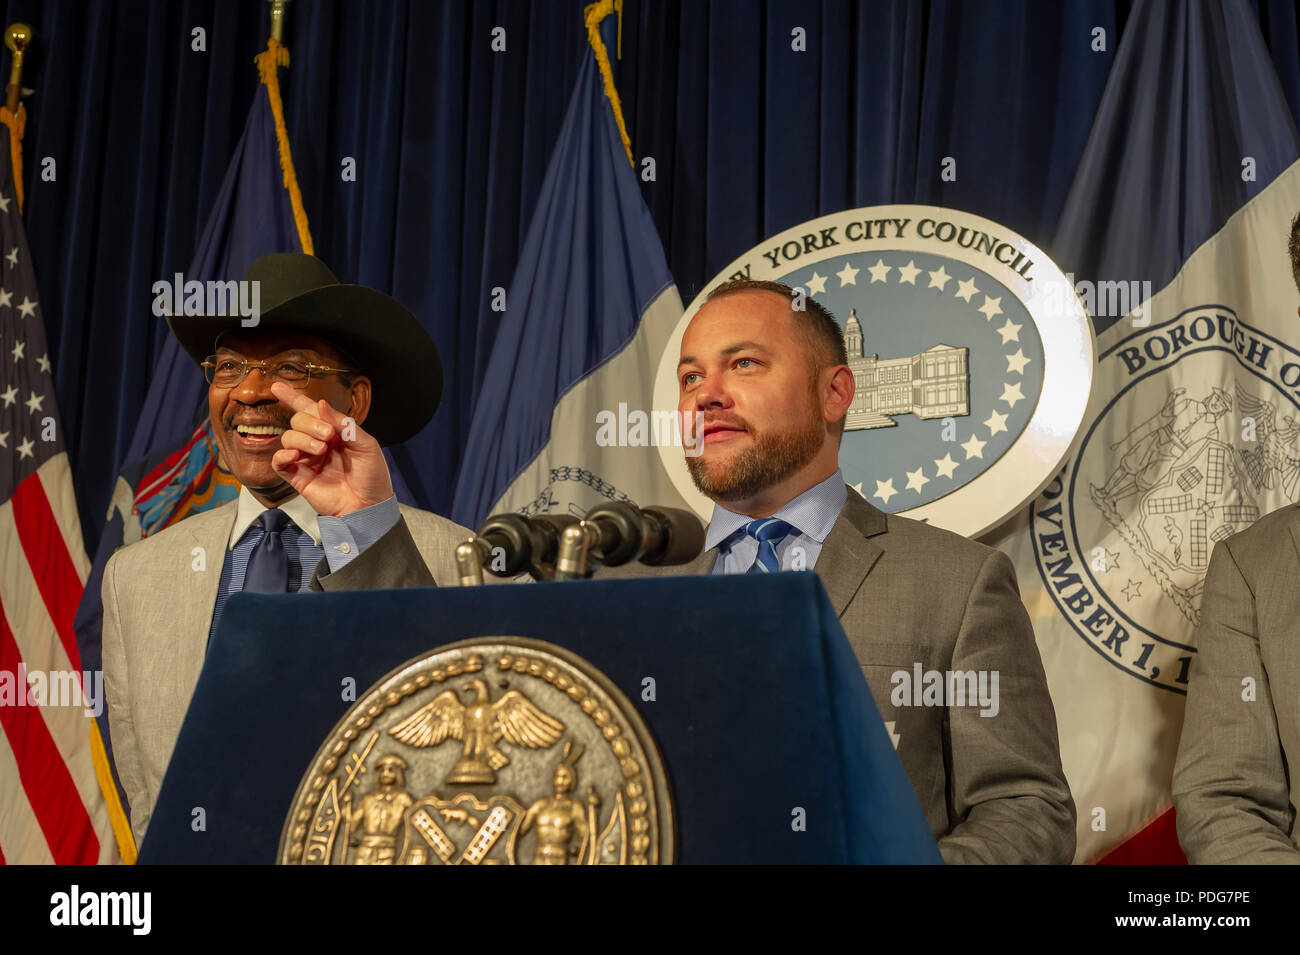 New York City Council Speaker Corey Johnson and members of the New York City Council hold a news conference  on Wednesday, August 8, 2018 in the Red Room of New York City Hall about pending legislation including a bill about the ride sharing industry.  (Â© Frances M. Roberts) Stock Photo